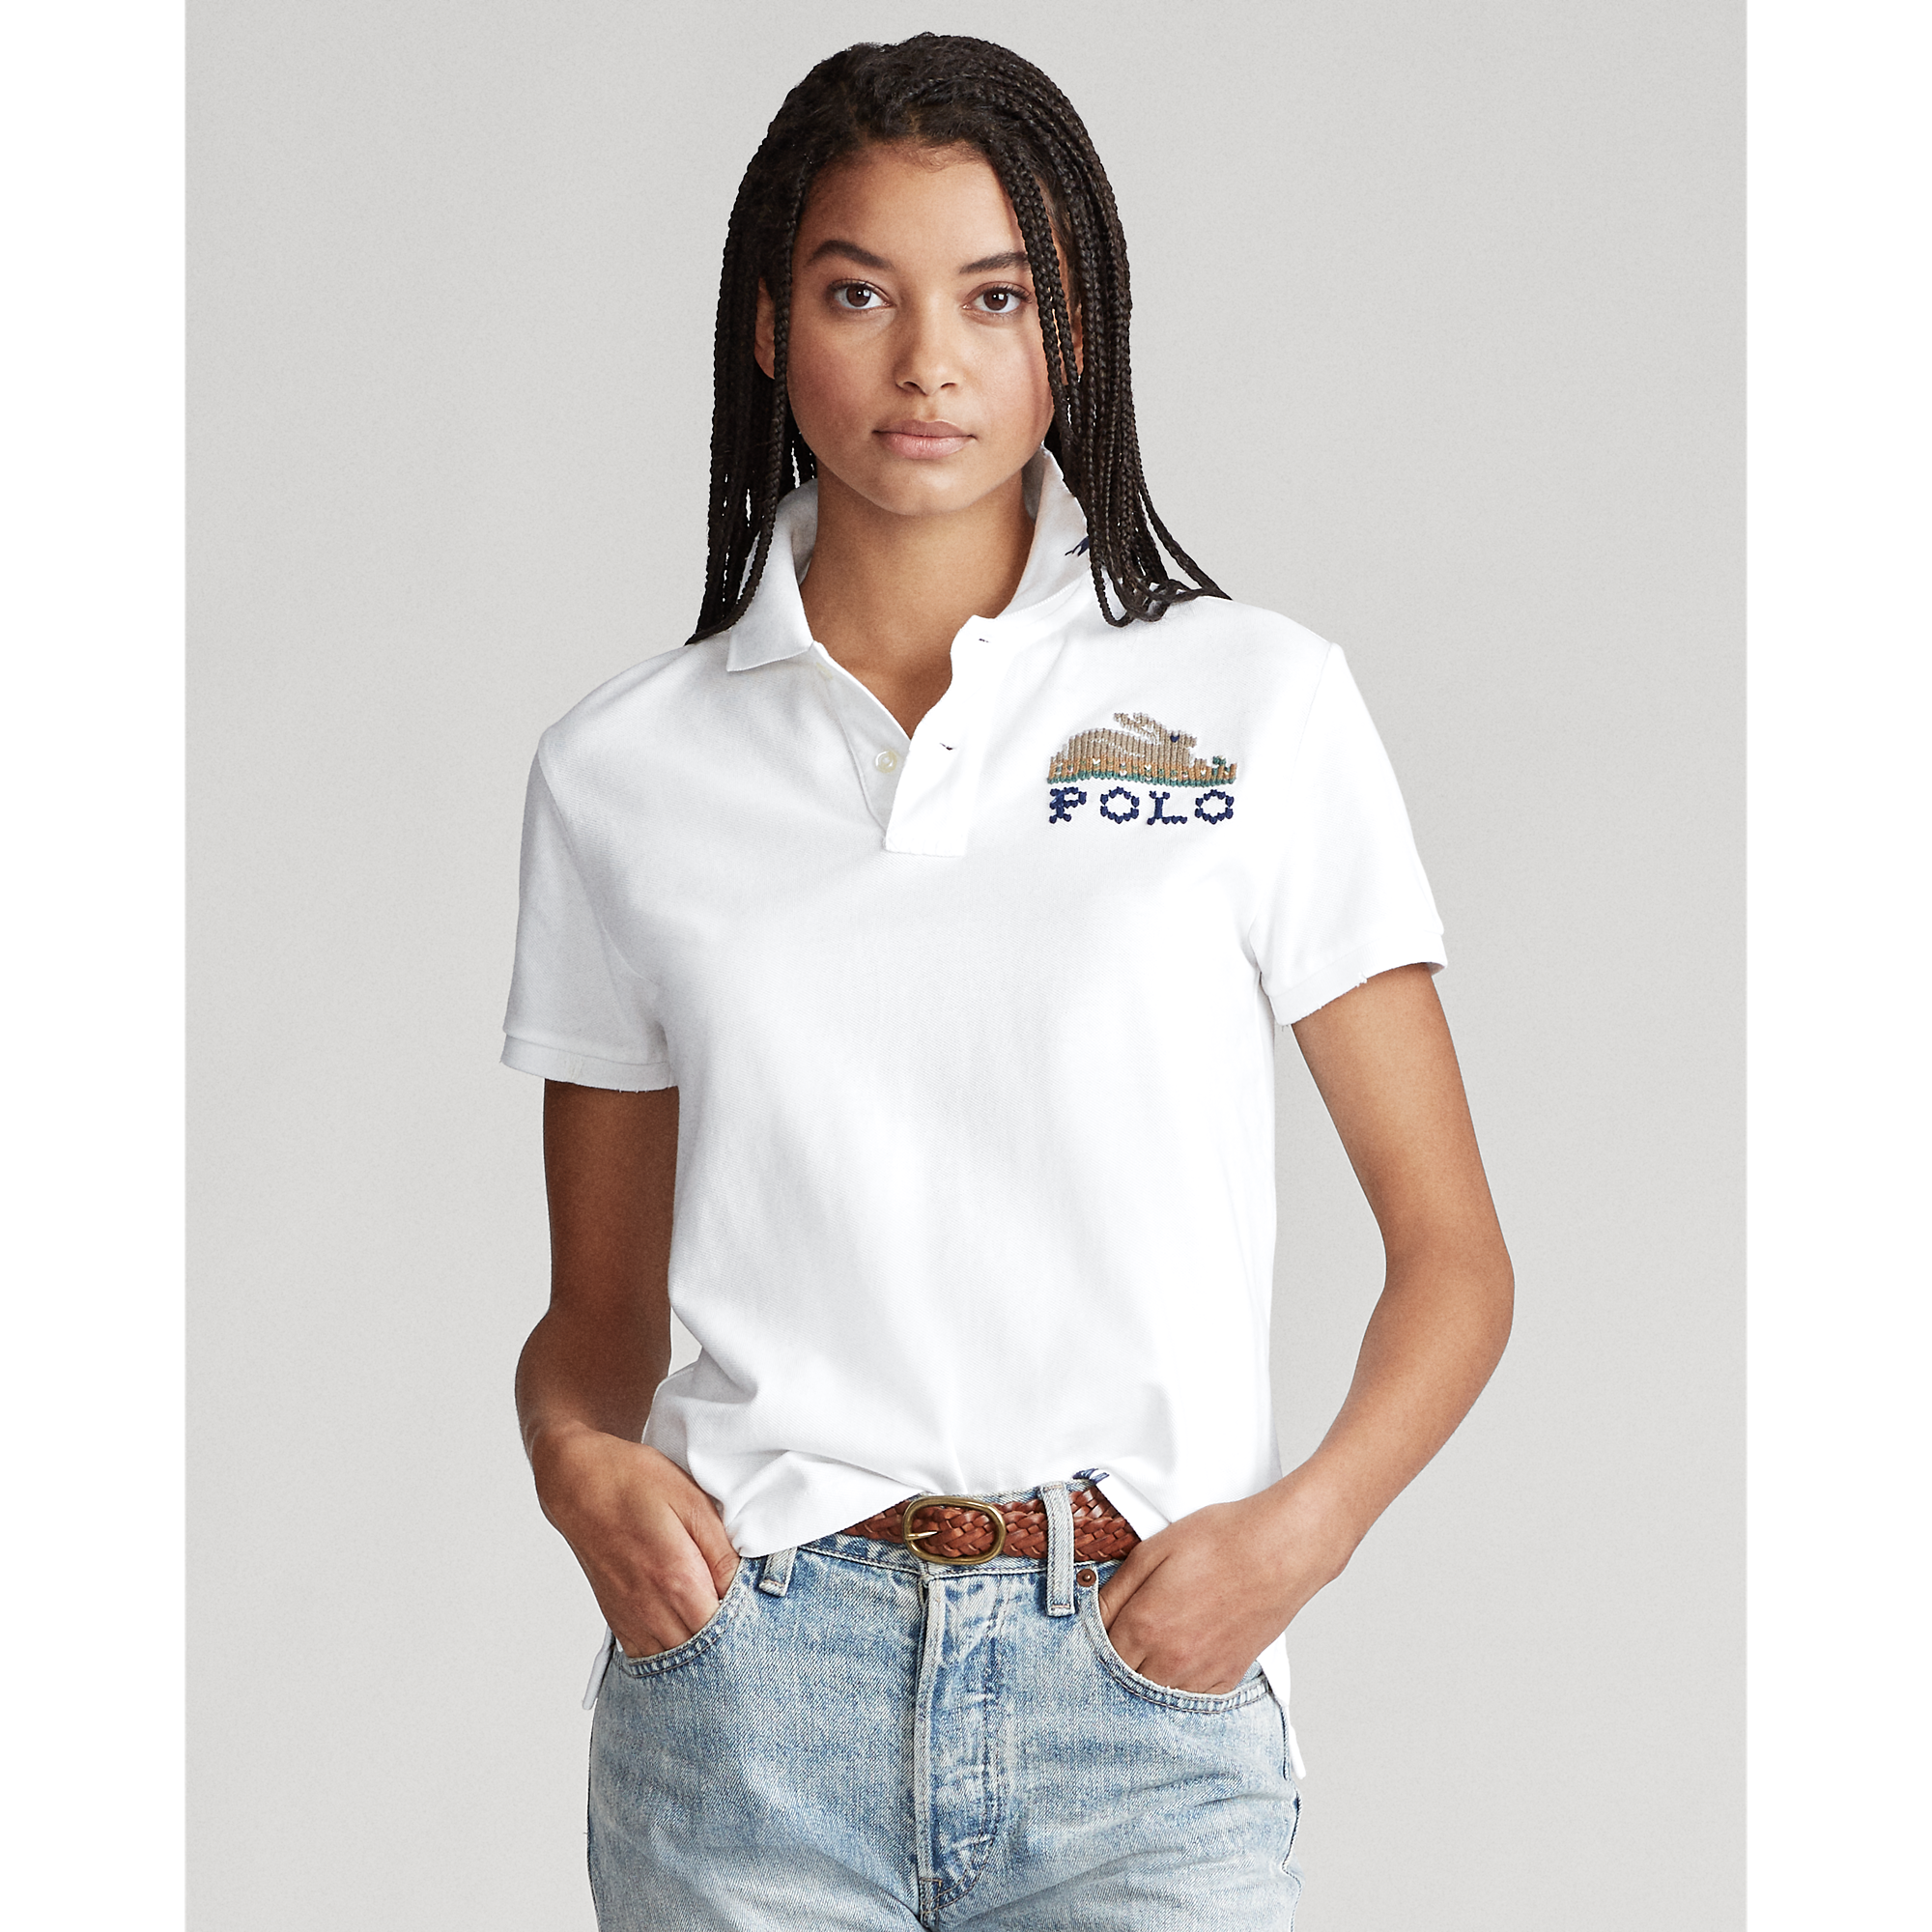 Ralph Lauren Classic Fit Embroidered Polo. 1